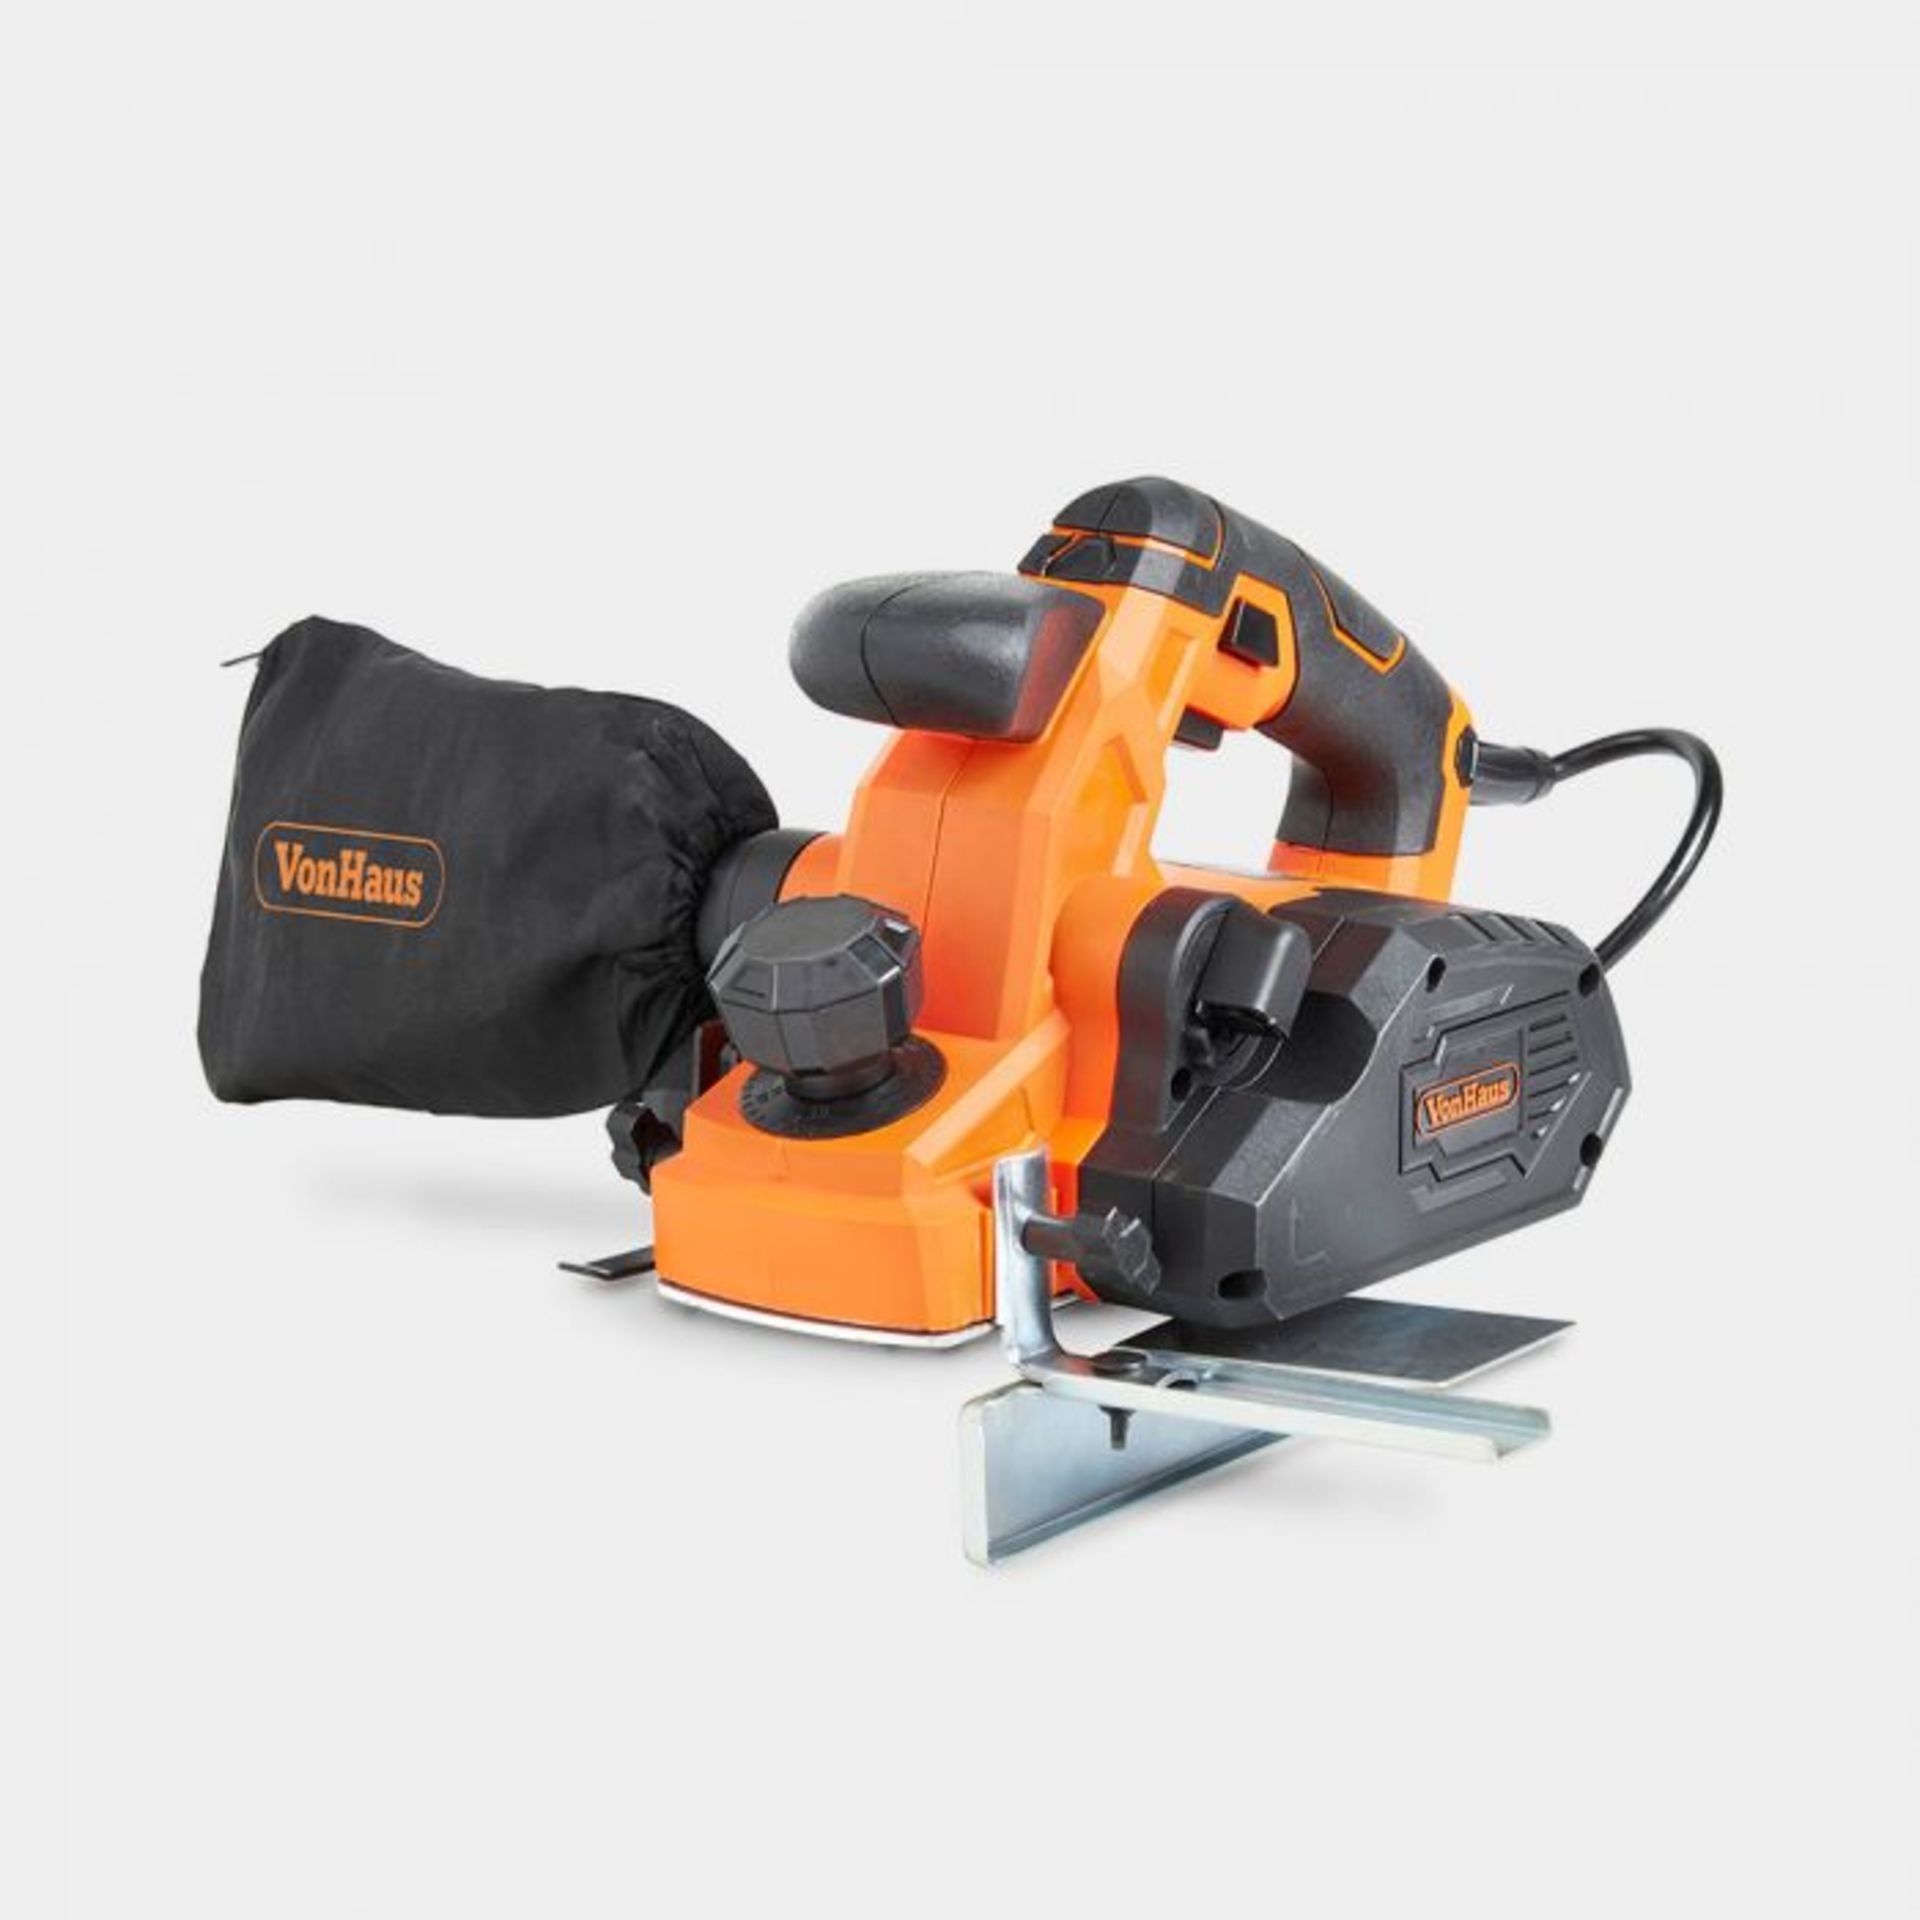 900W Electric Hand Planer. Make light work of fixing doors, fitting wood and correcting splinters,